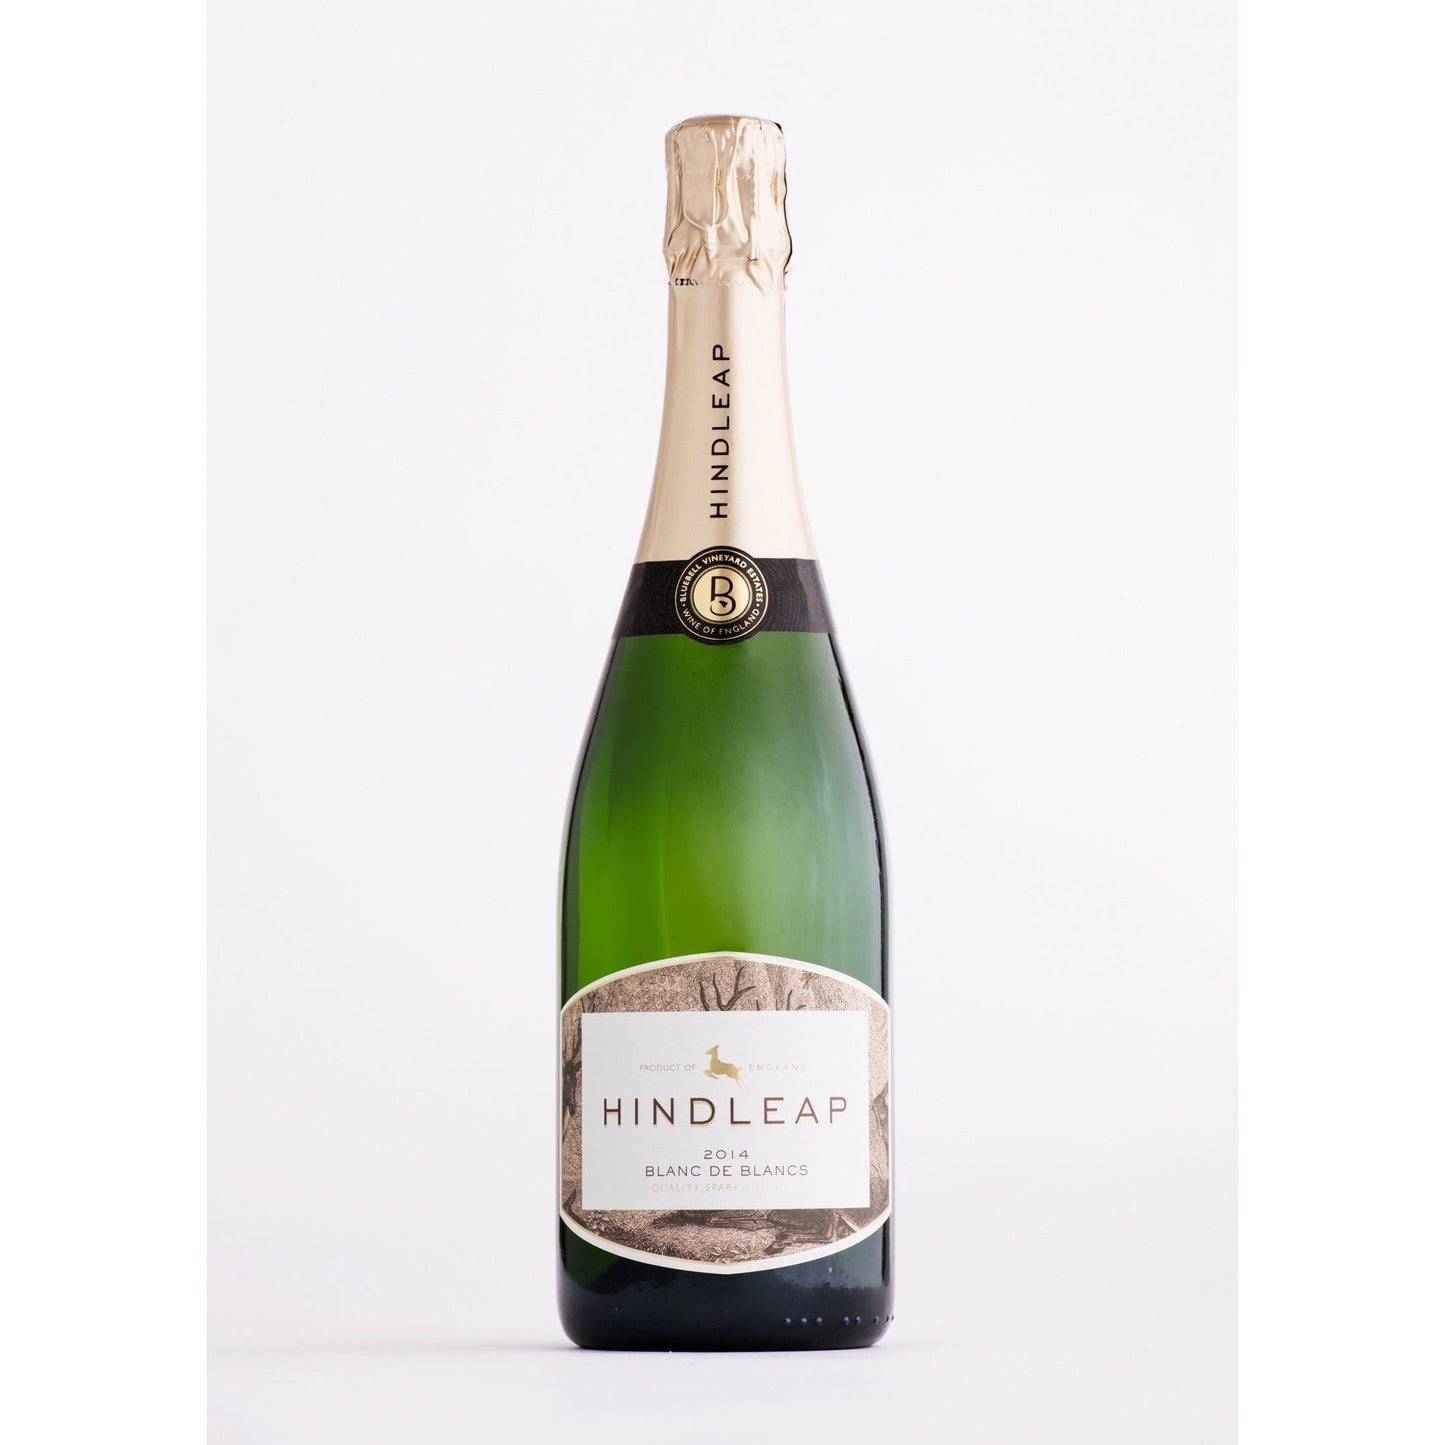 Hindleap Blanc de Blanc Sparkling White wine The English Wine Collection 